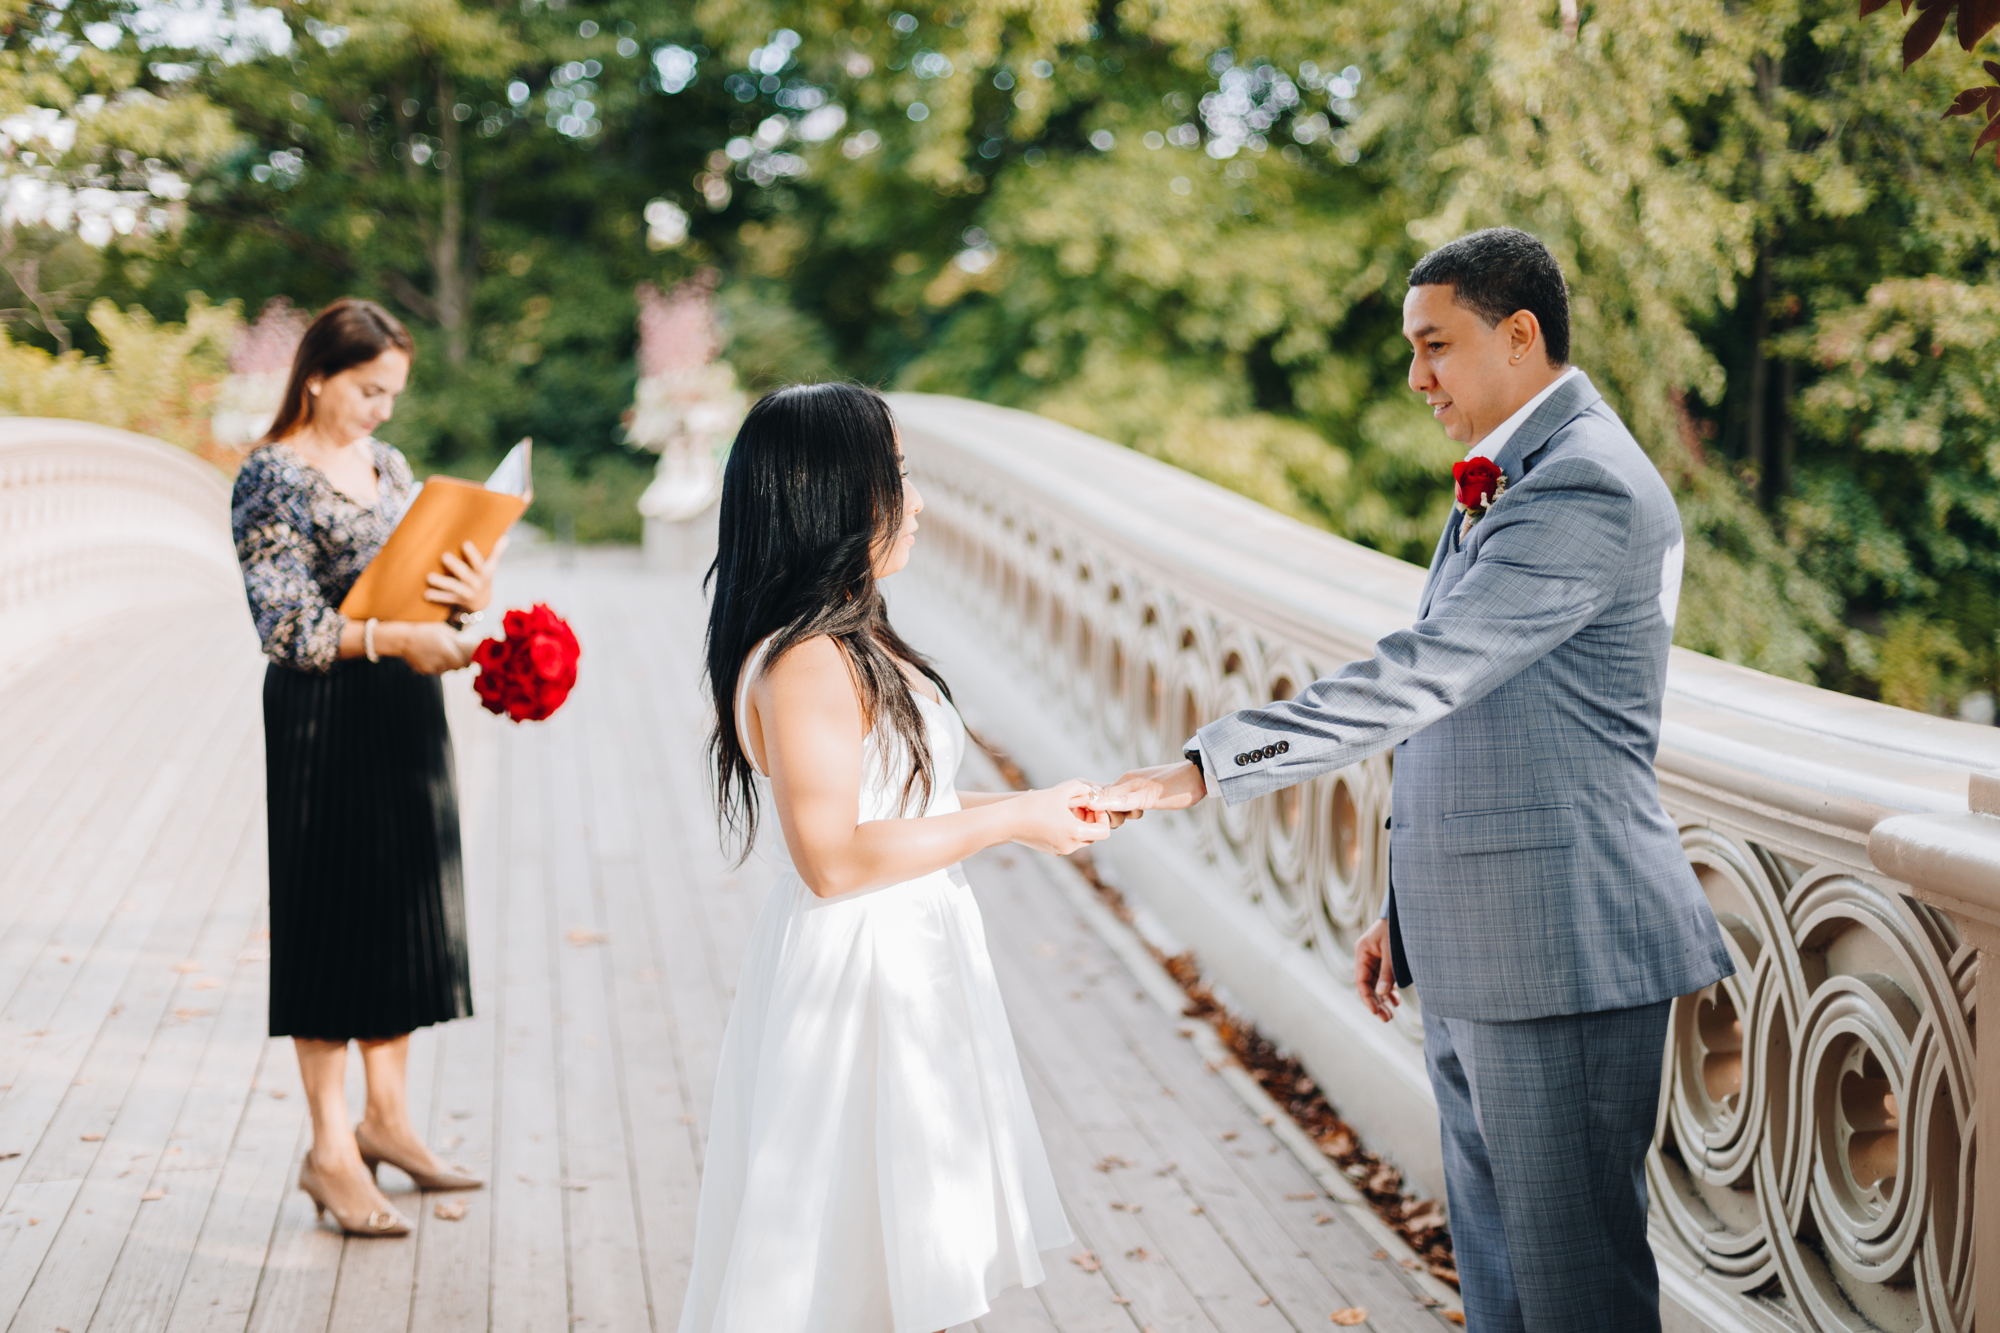 Candid Bow Bridge Elopement Photos in Fall Foliage